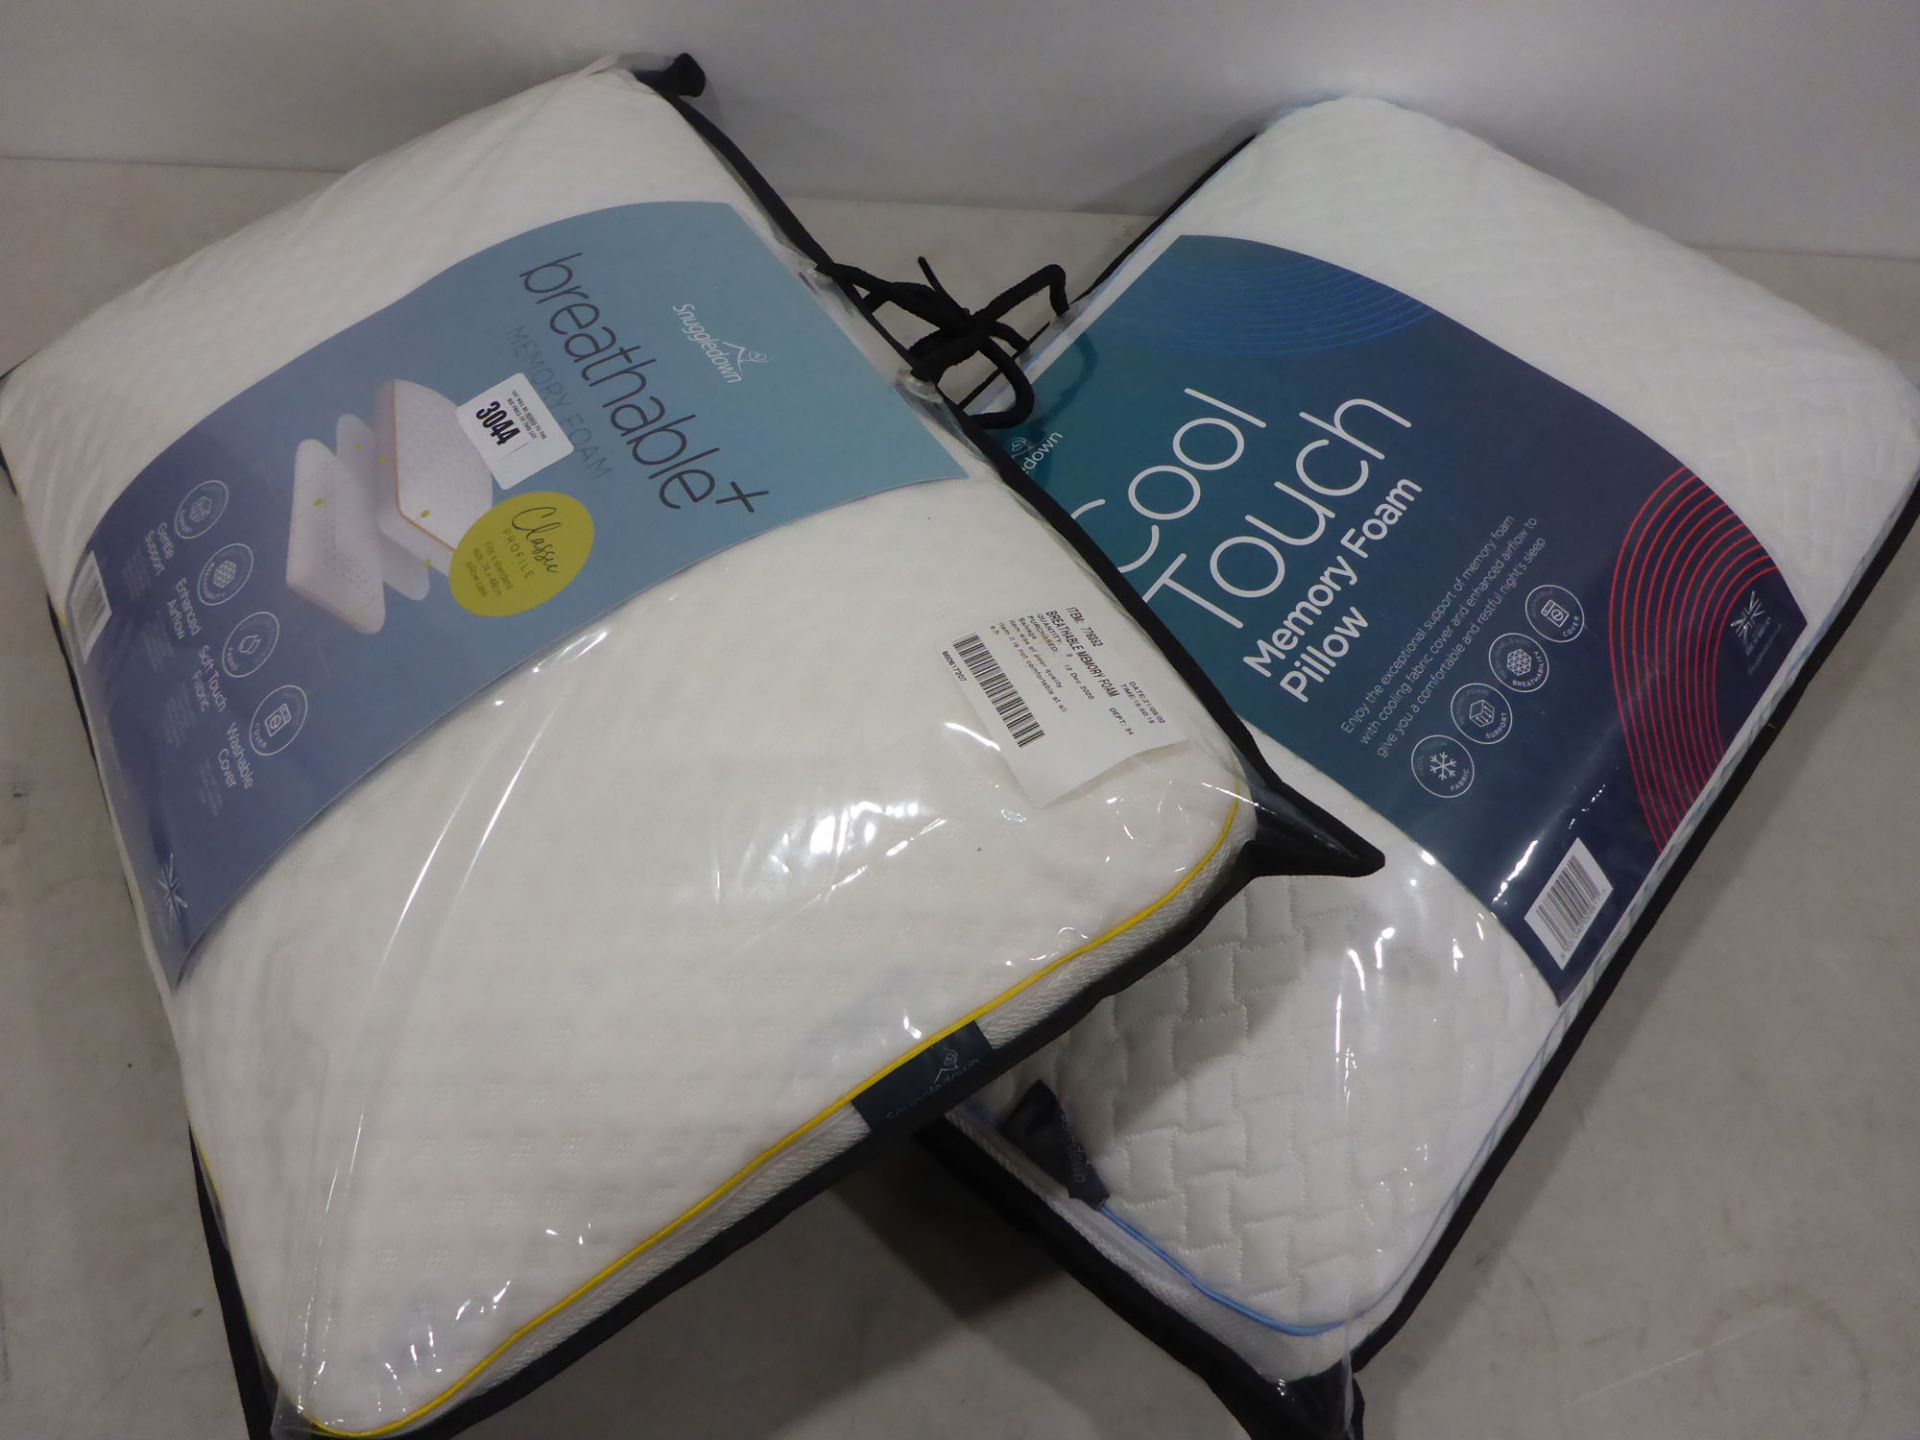 Two snuggle down memory foam breathable pillows